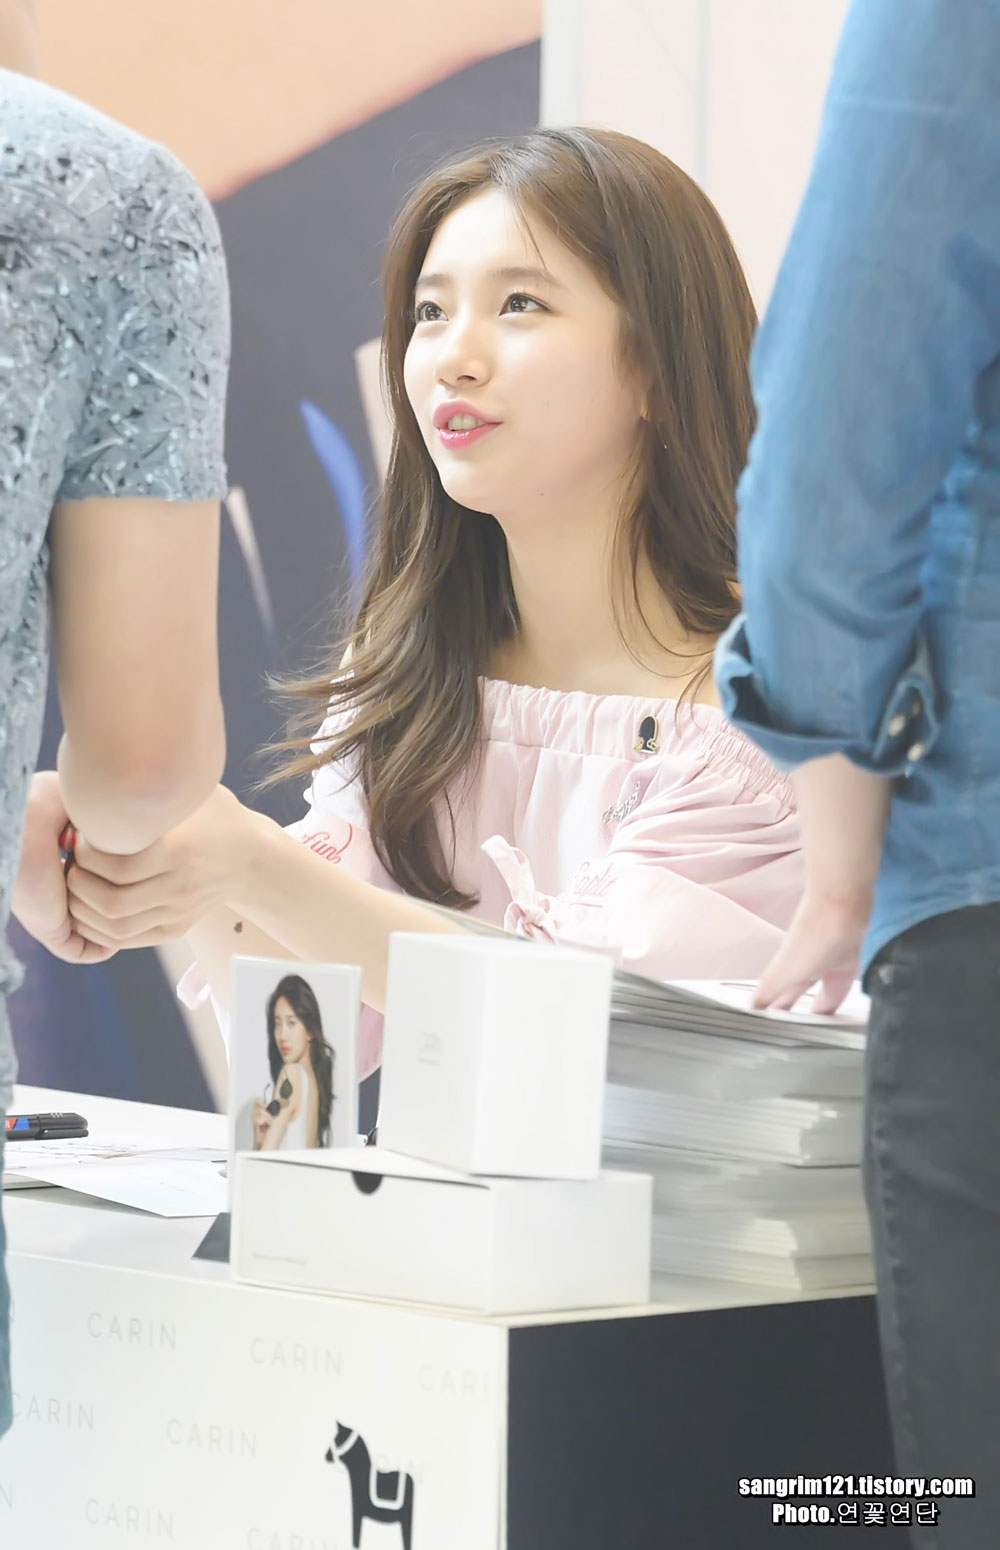 Bae Suzy Carin fan signing event